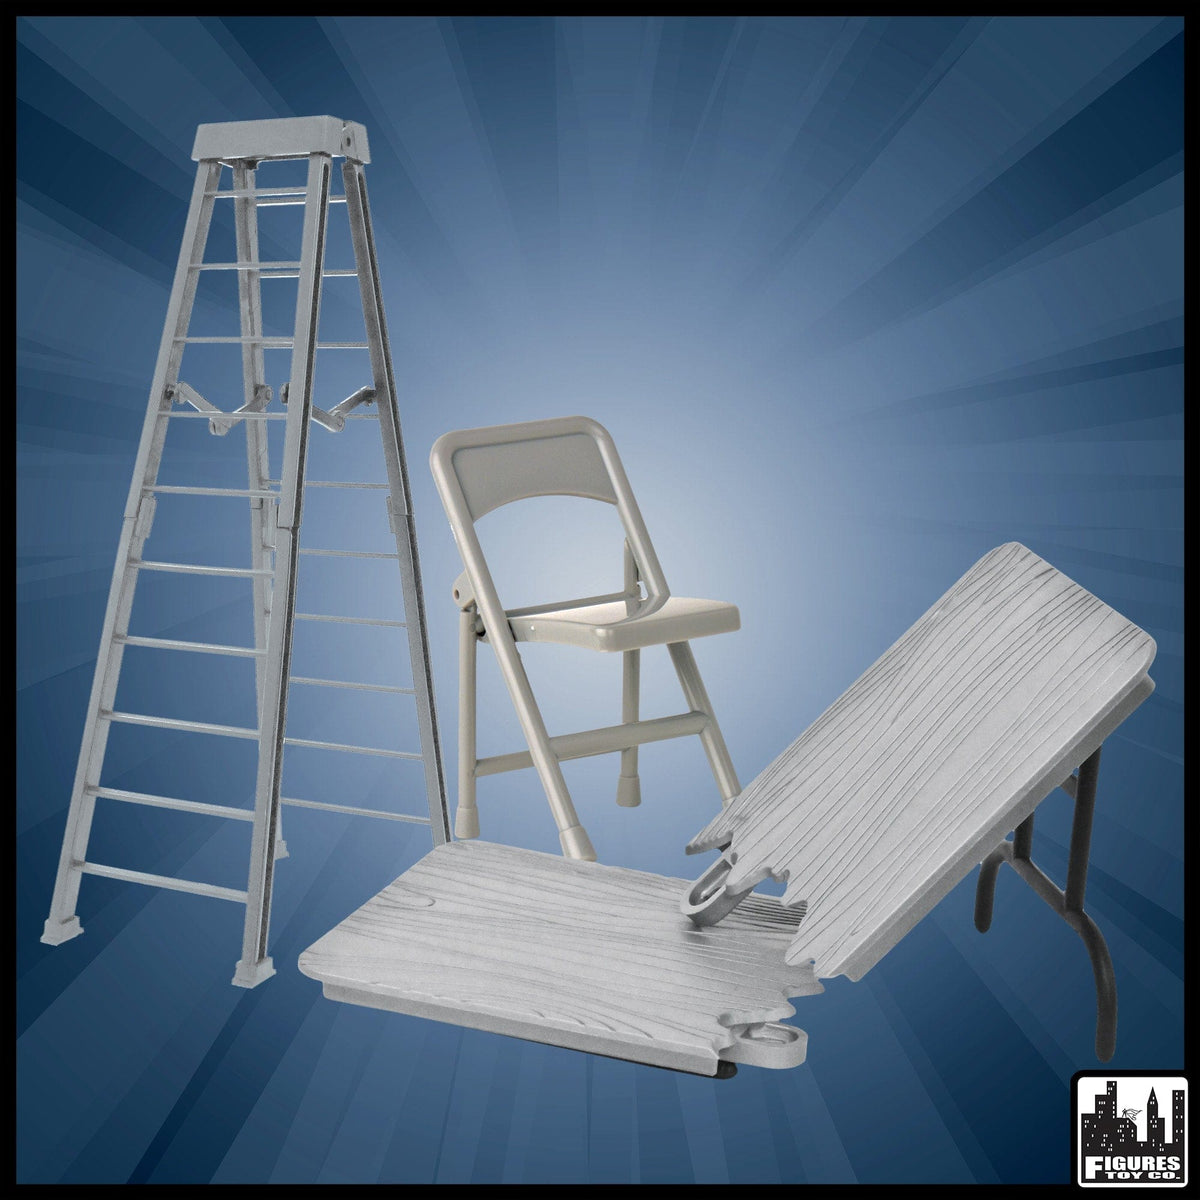 10 Inch Silver Ladder, Silver Table and Folding Chair for WWE Wrestling Action Figures